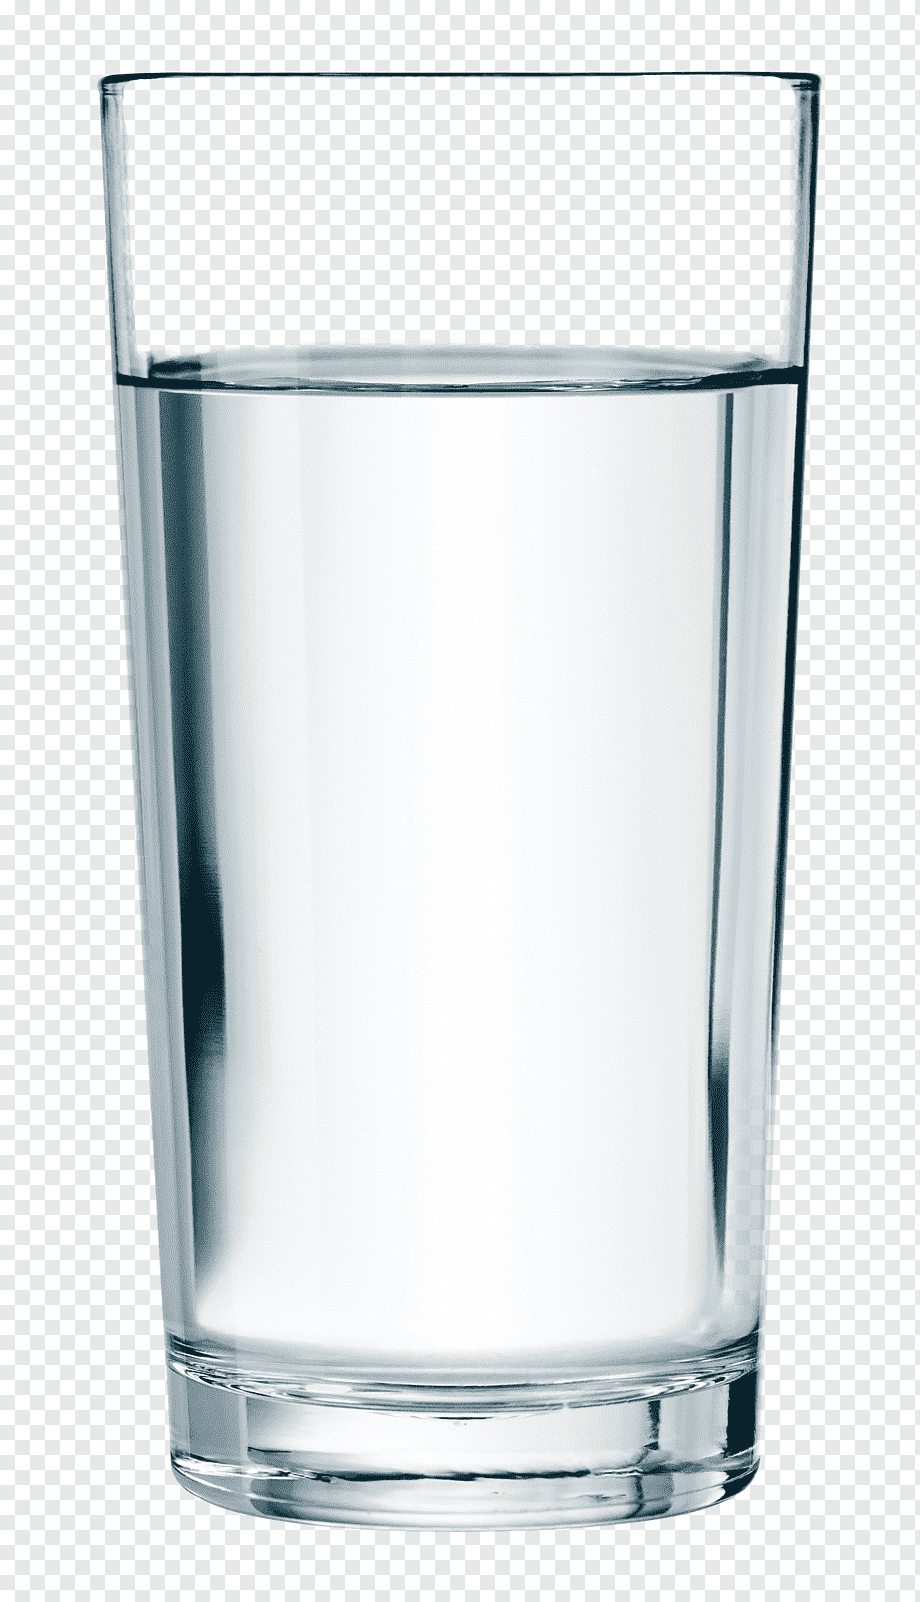 png-transparent-clear-glass-cup-with-water-cup-glass-drinking-water-champagne-glass-glass-tumbler-drinking.png